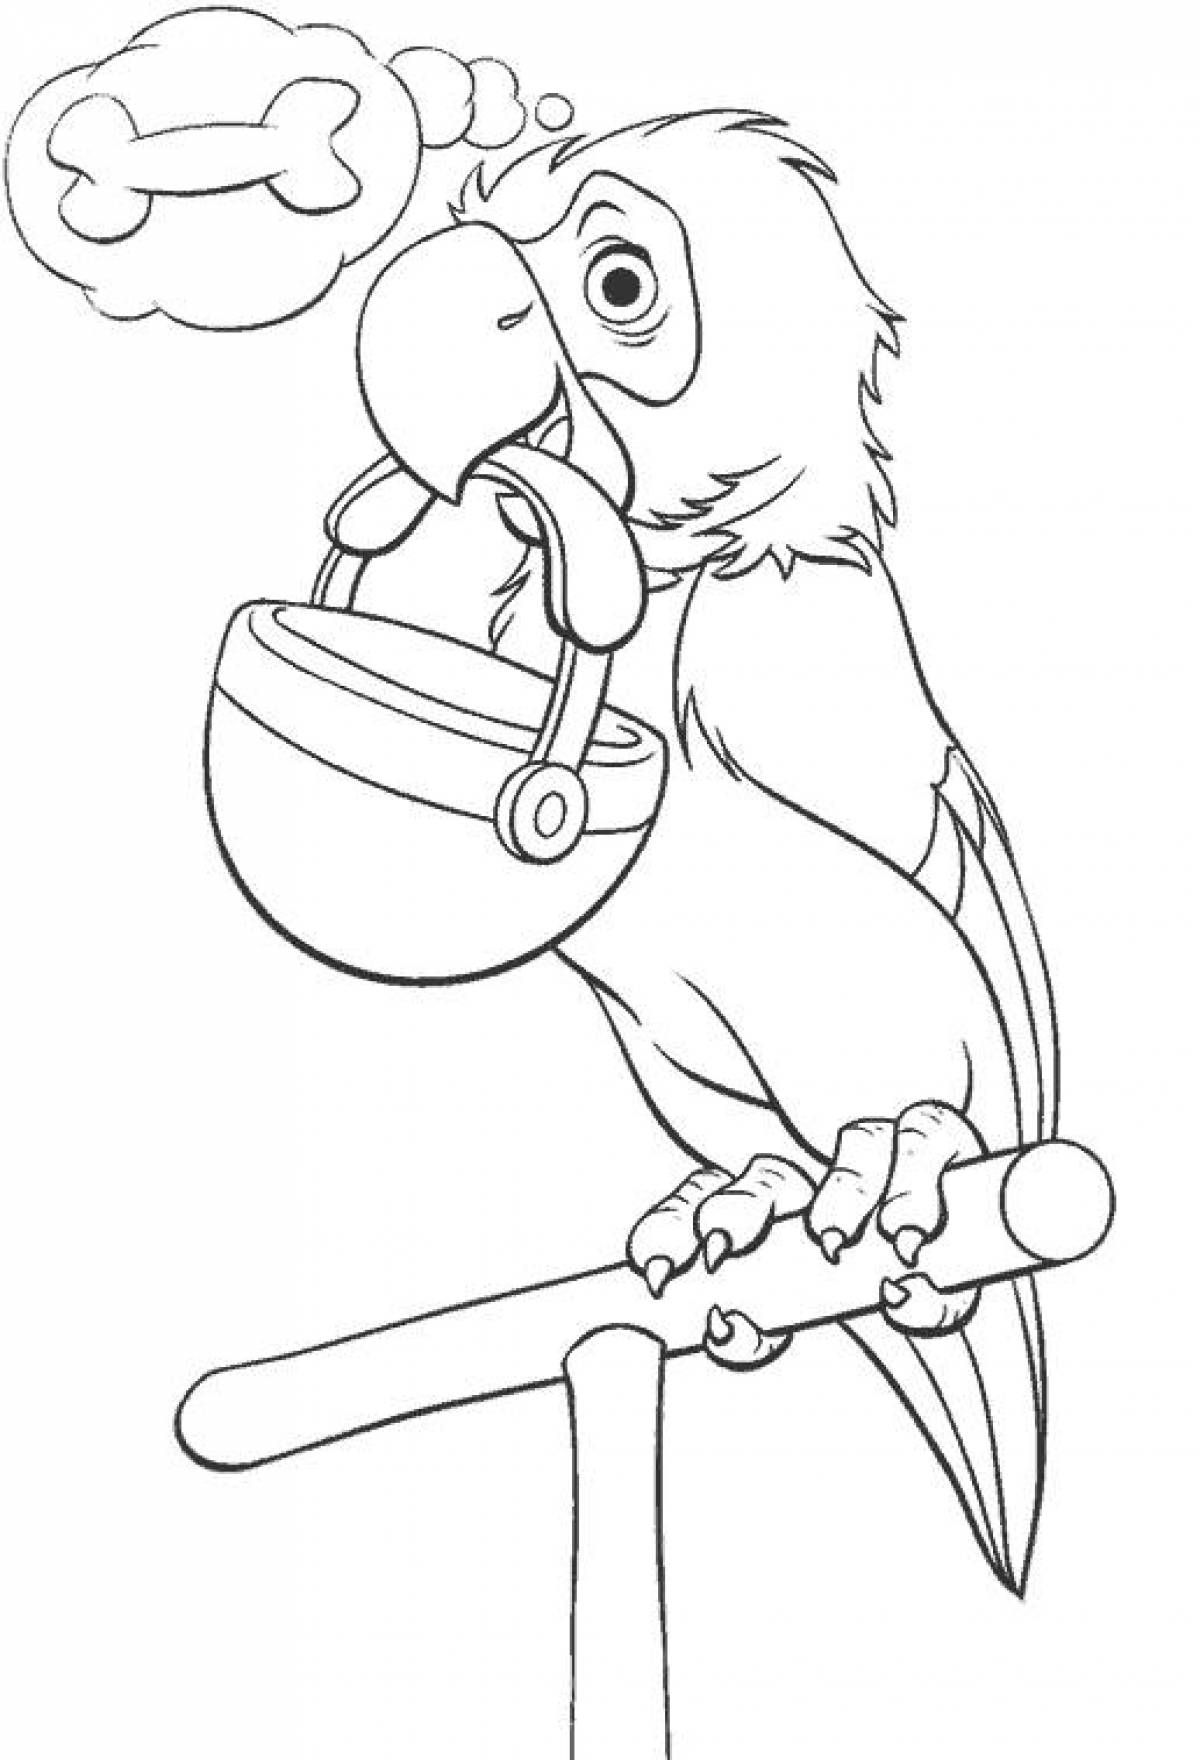 Parrot with a basket